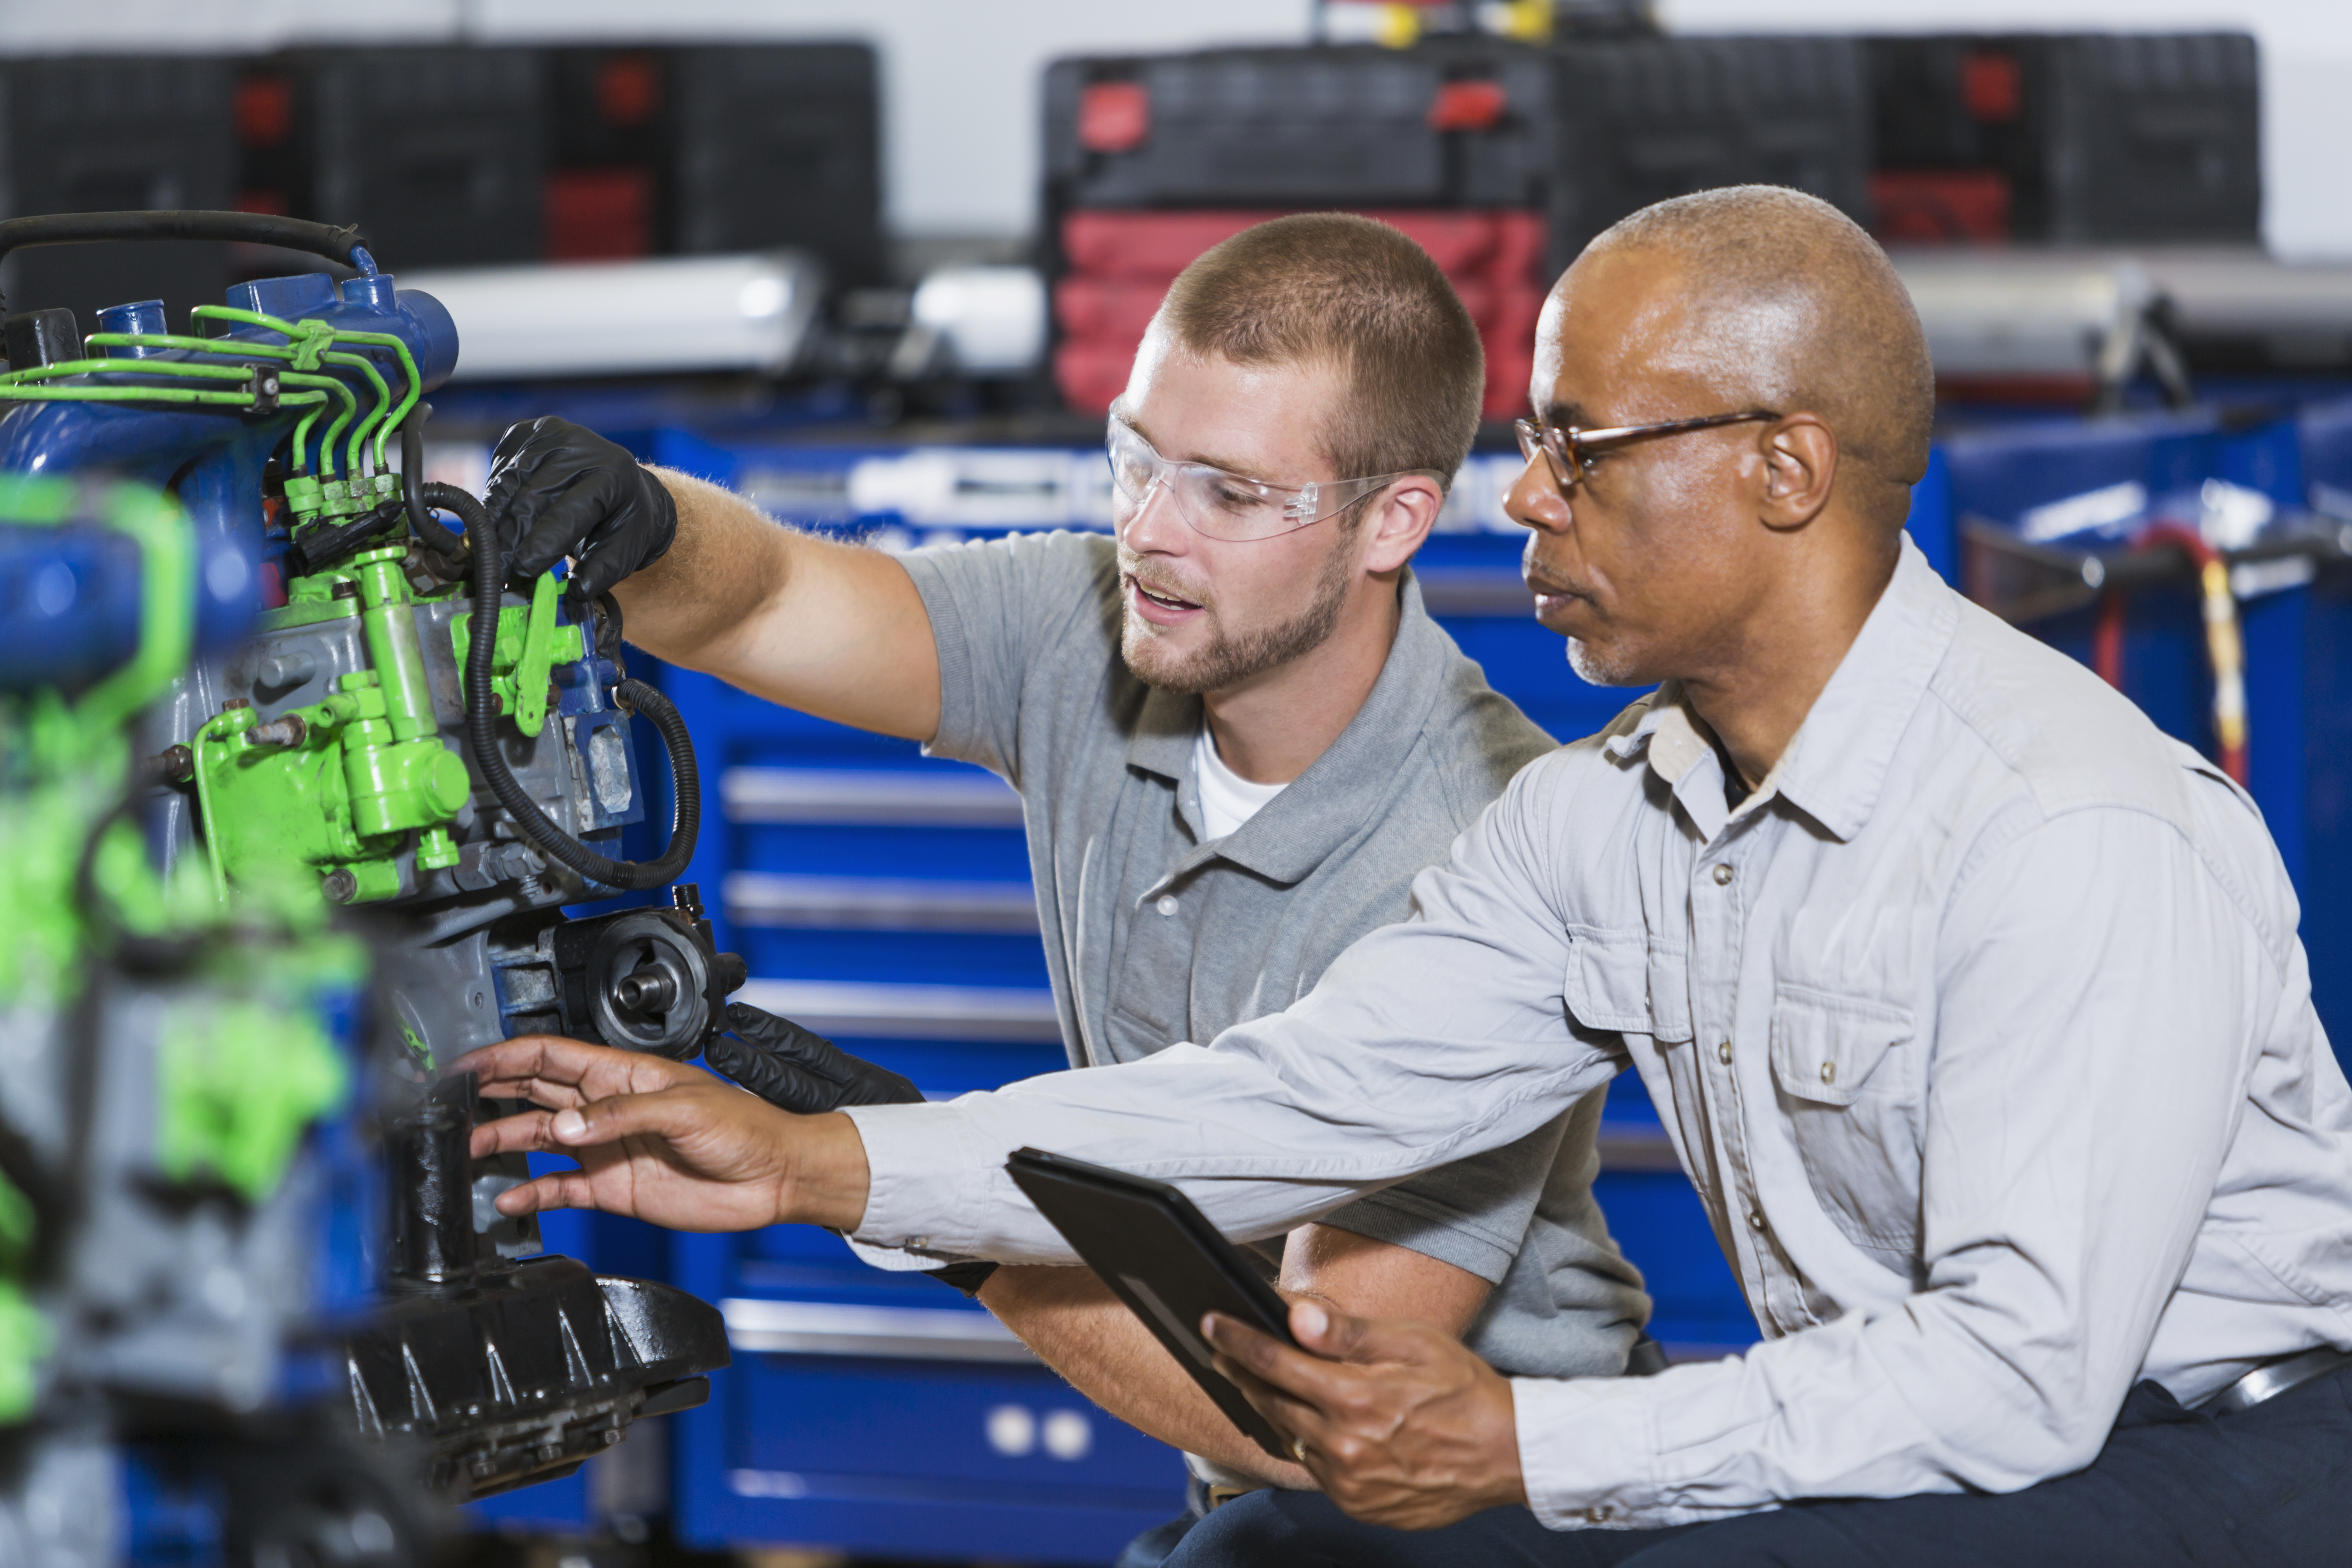 Instructor and student working on an engine in an automotive trade school class